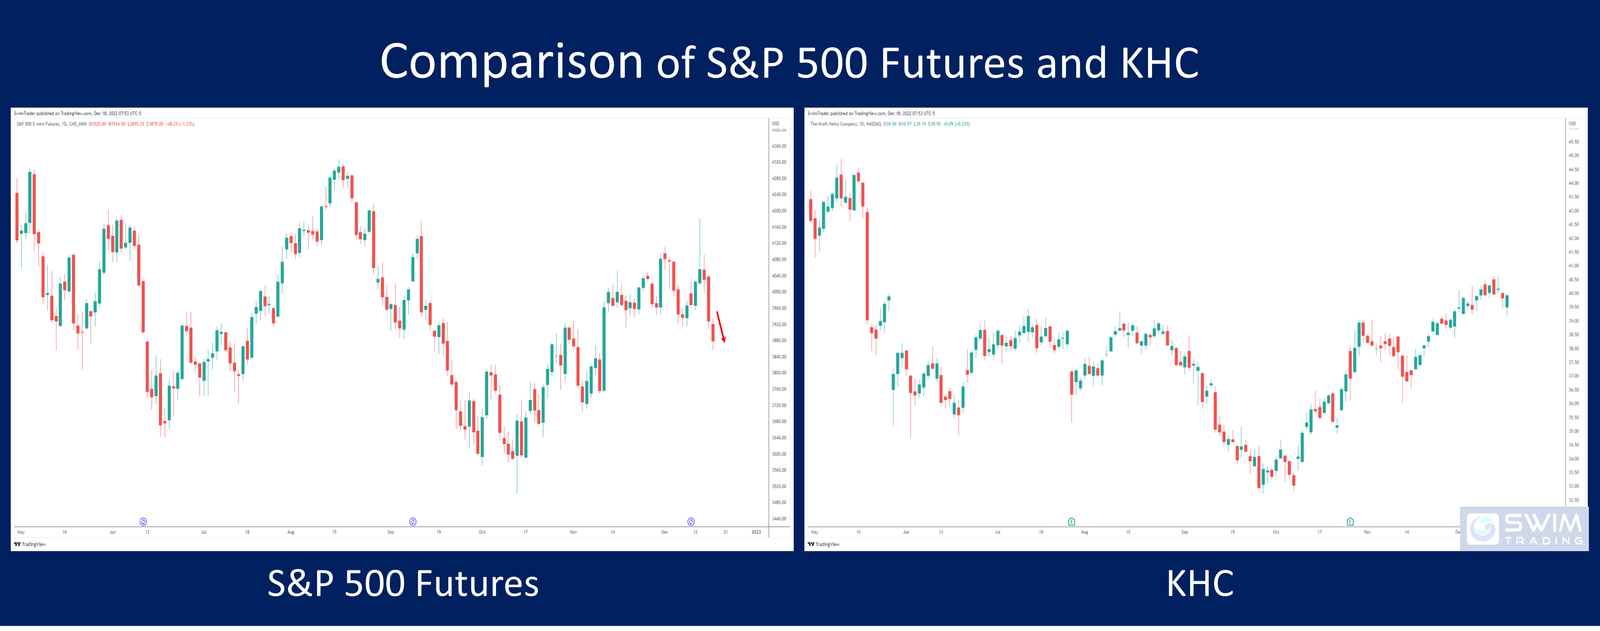 Performance of S&P 500 futures compared to the performance of Kraft Heinz's shares